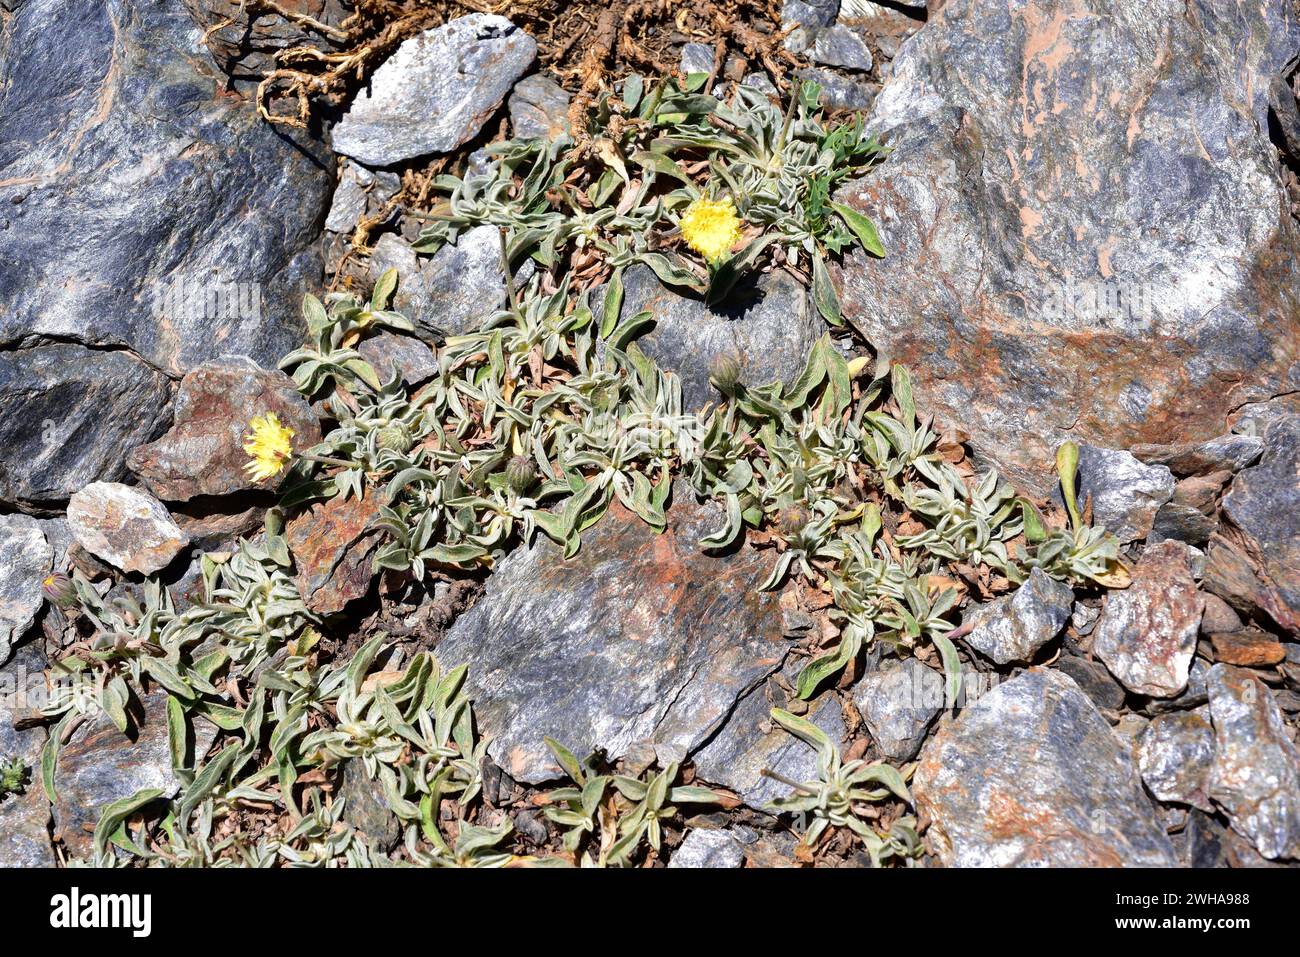 Andryala agardhii is a perennial herb endemic to Andalucia mountains and north western Africa. This photo was taken in Sierra Nevada National Park, Gr Stock Photo